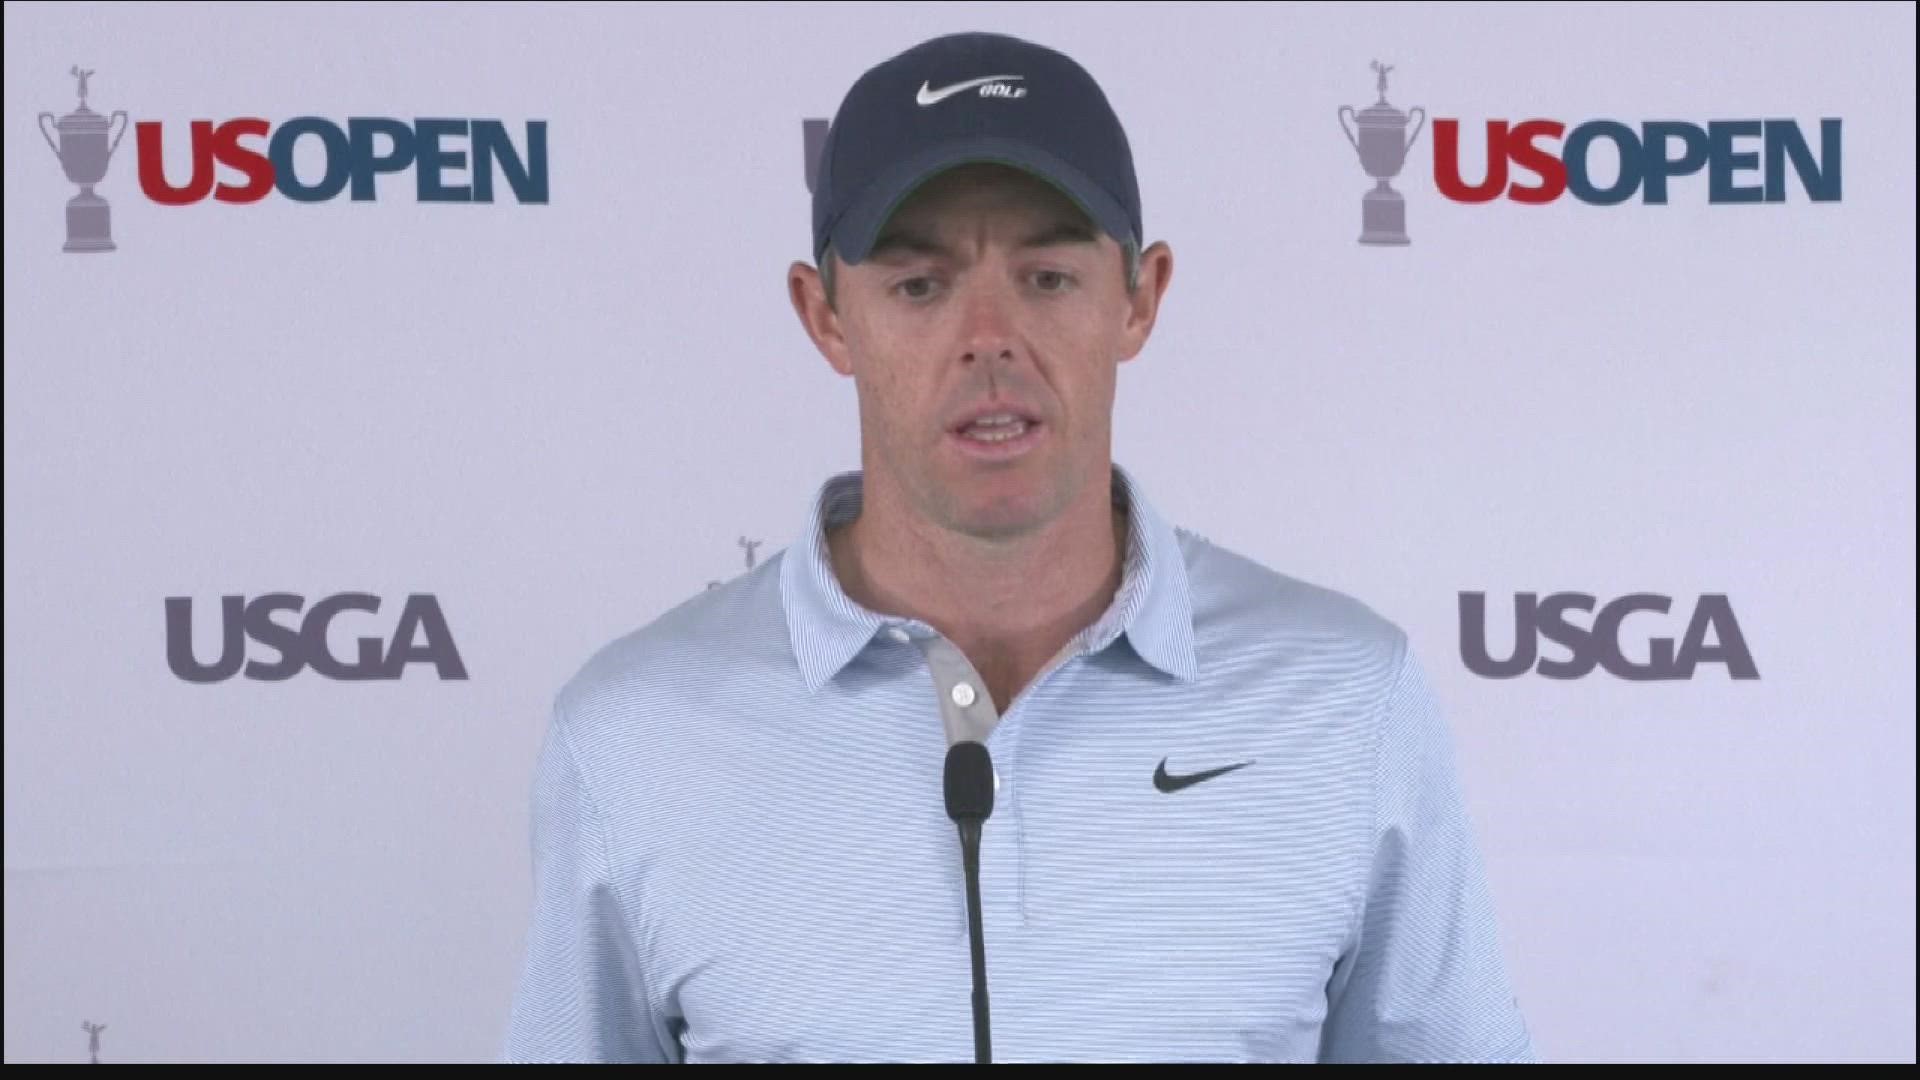 Favorite Rory McIlroy has some thoughts about the players playing for the LIV Golf Tour.